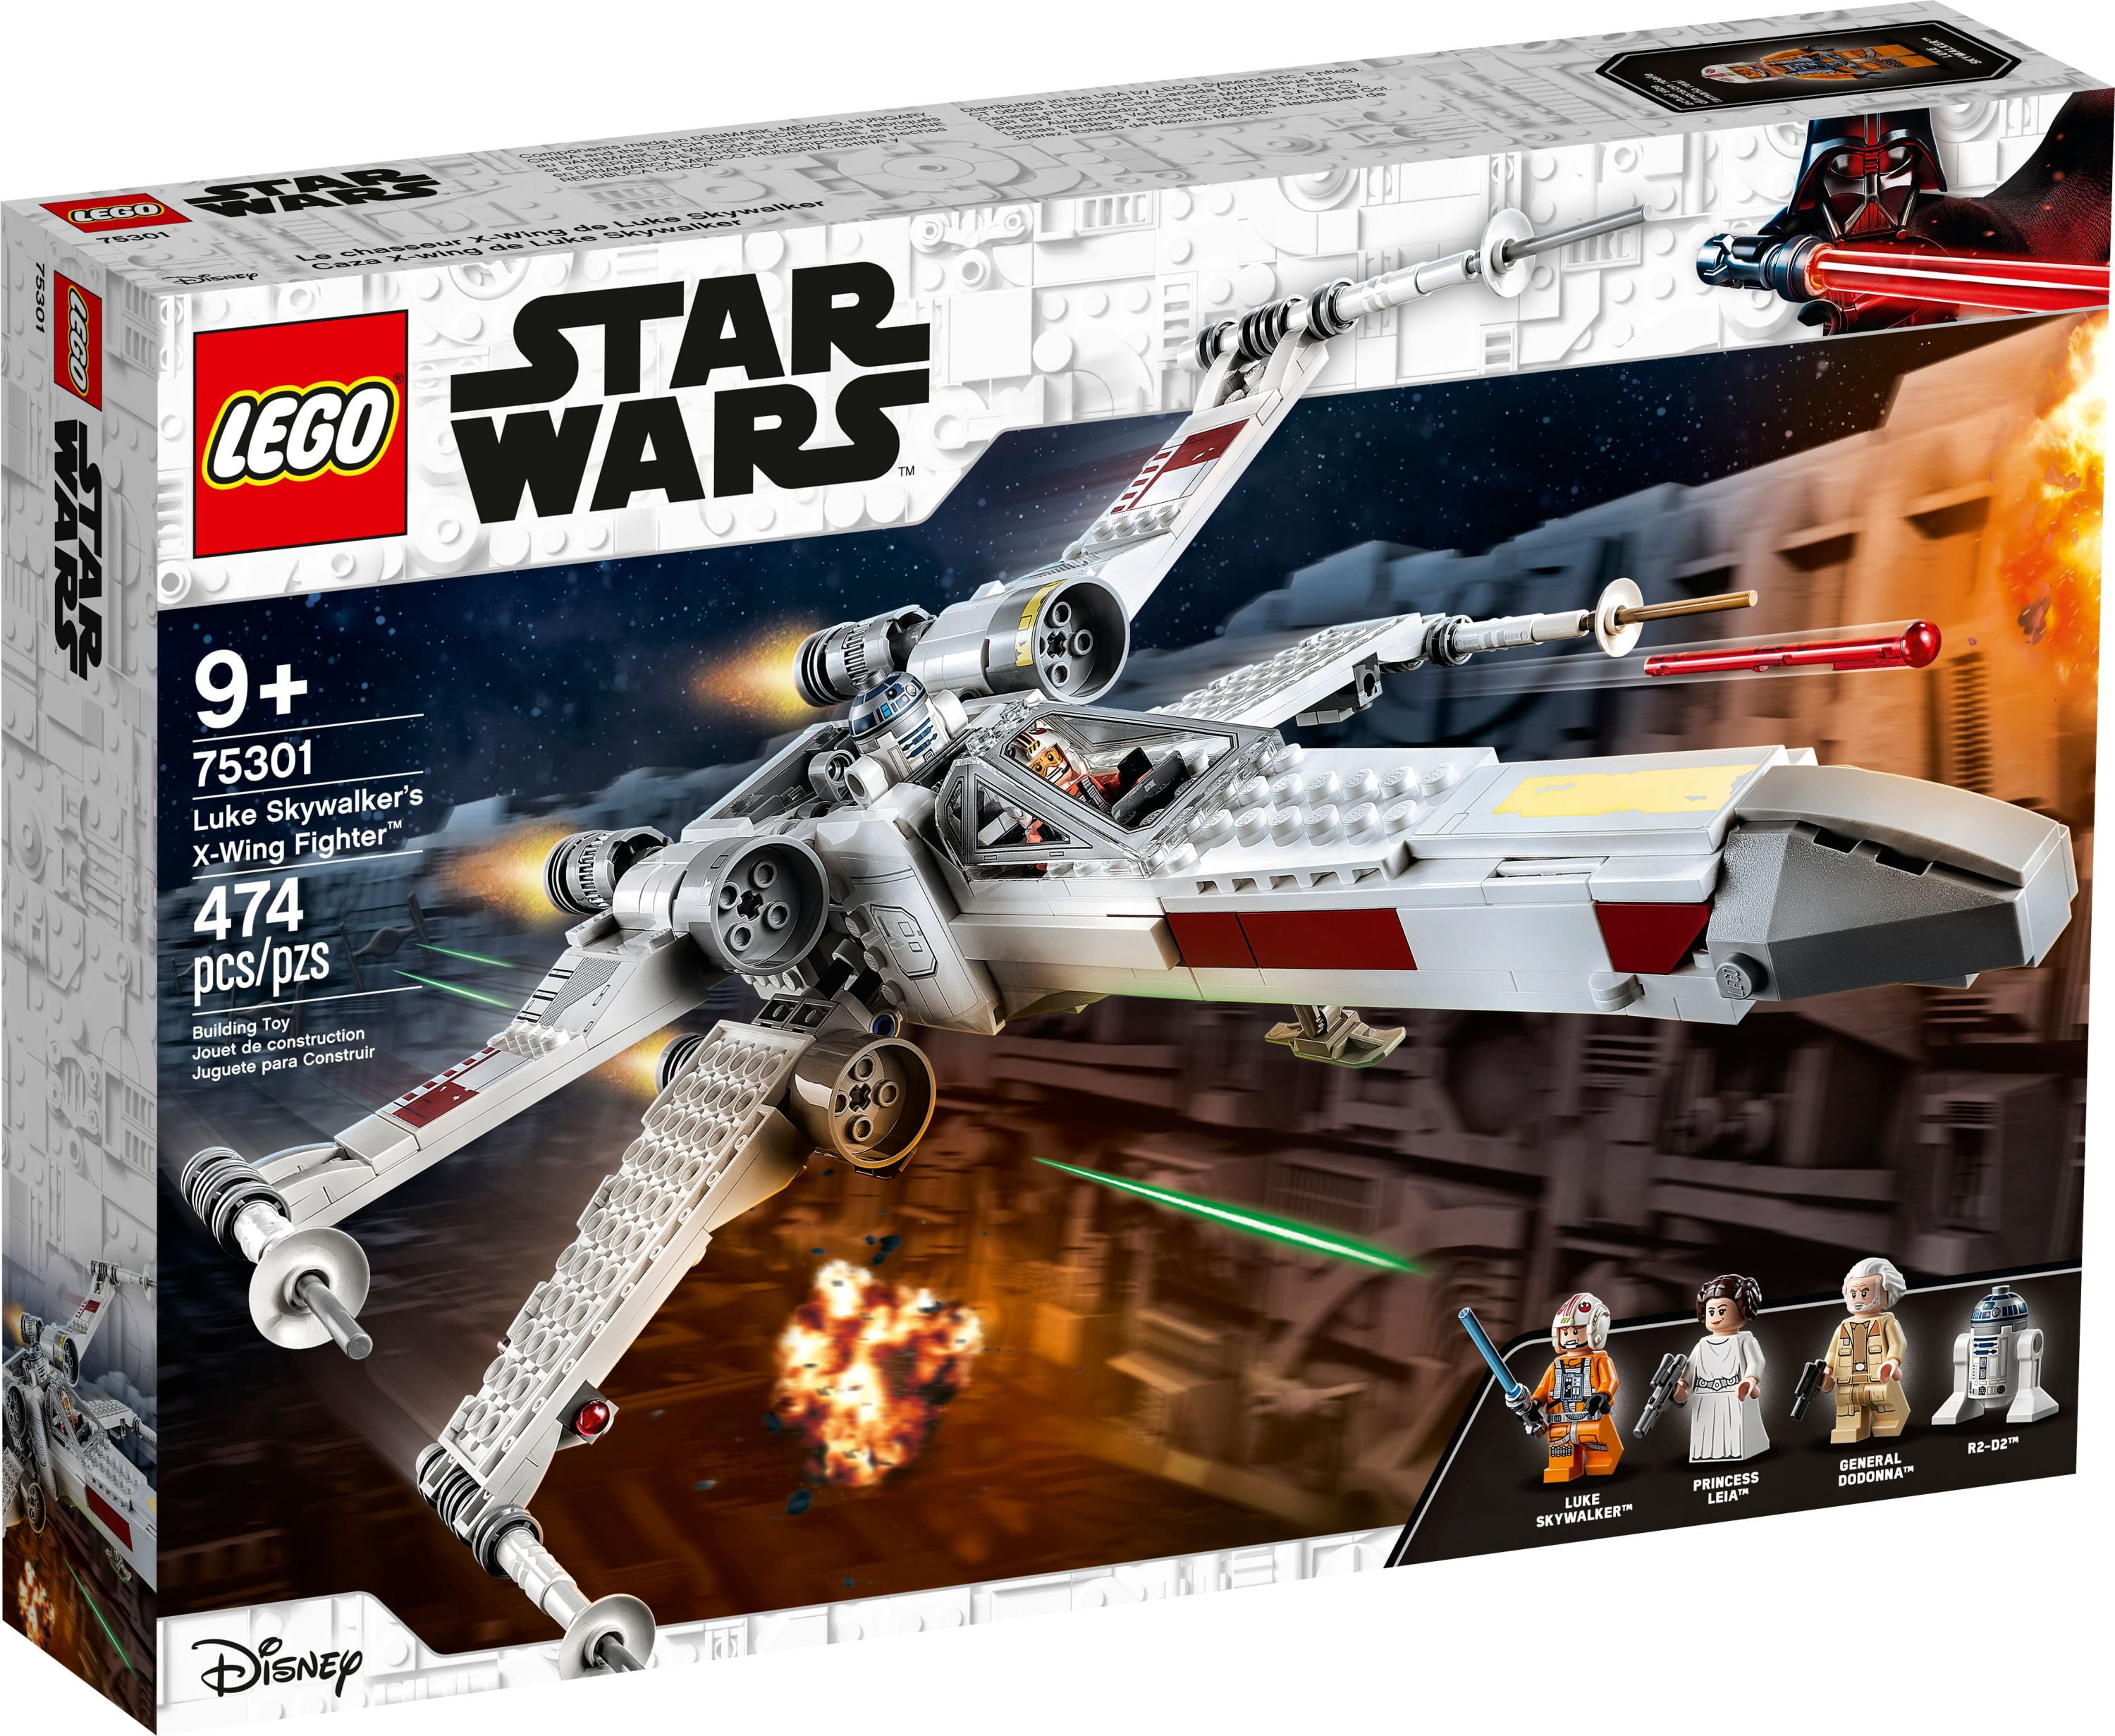 Star Wars Luke Skywalker's X-Wing Fighter 75301 Building Toy, Gifts for Kids, Boys & Girls with Princess Leia Minifigure and R2-D2 Droid Figure -